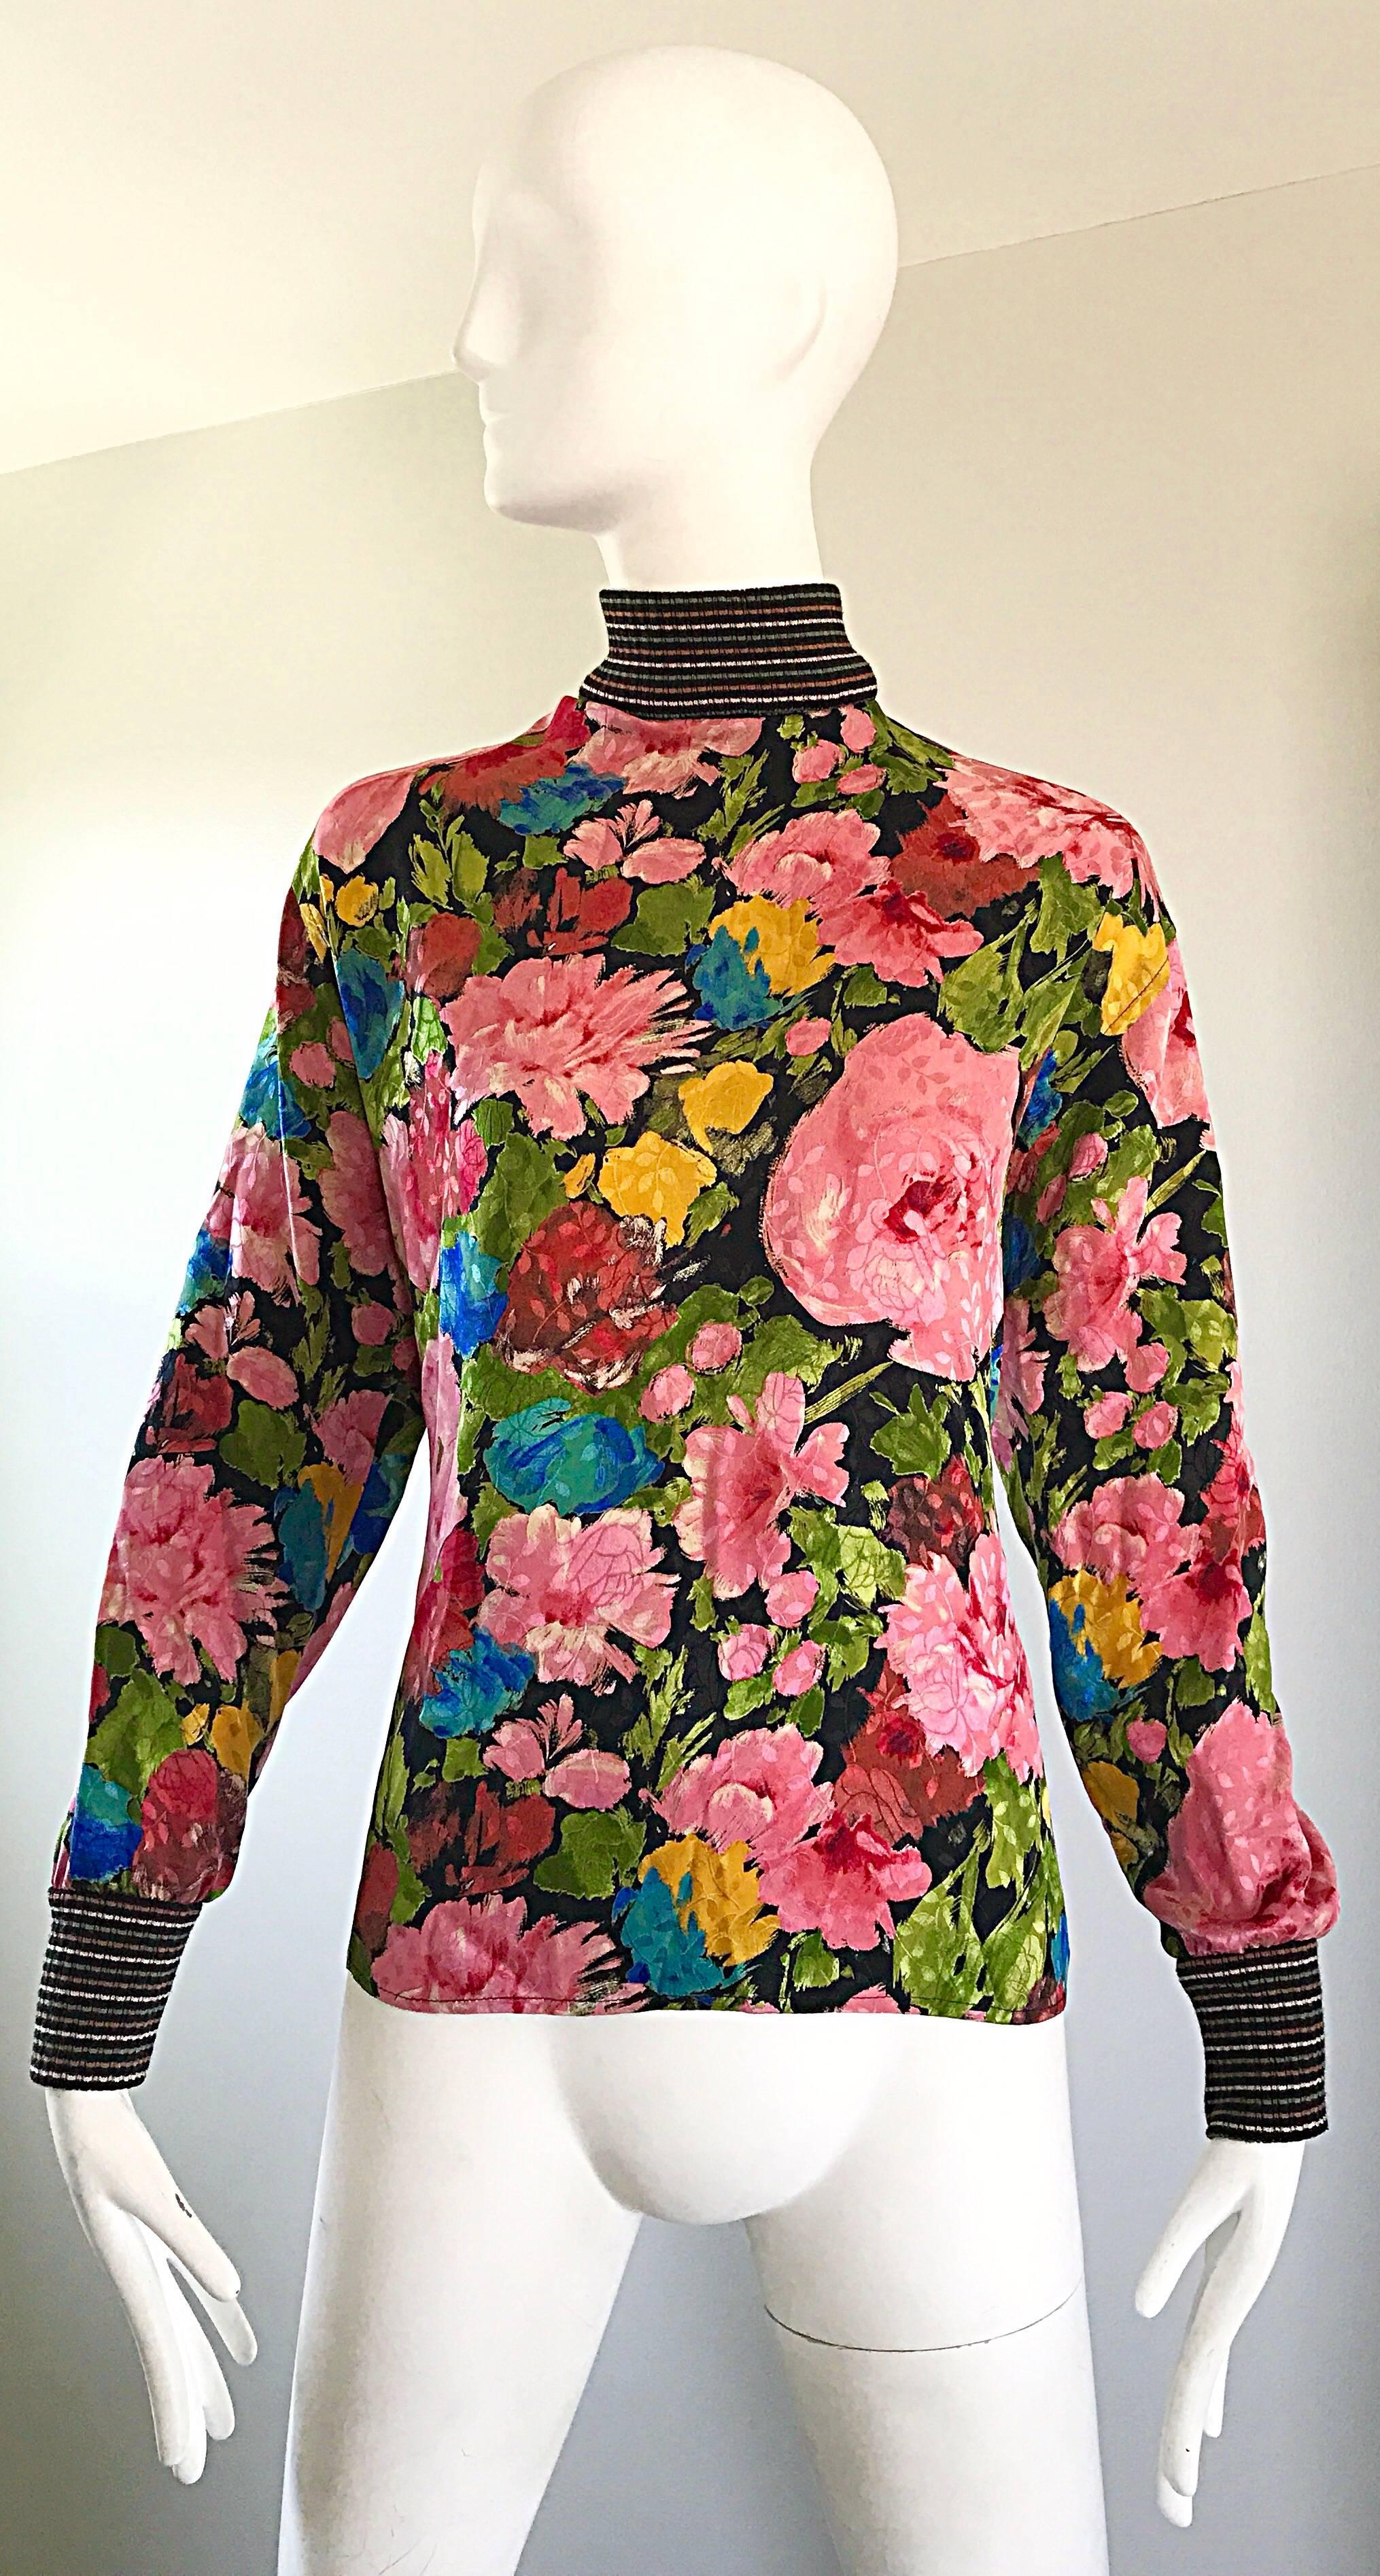 Beautiful 1990s EMANUEL UNGARO floral print silk and knit blouse! Features vibrant colored flowers in pink, blue, green, and yellow throughout. Luxurious silk body with fitted striped knit sleeve cuffs and collar. Black lacquer buttons up the back.